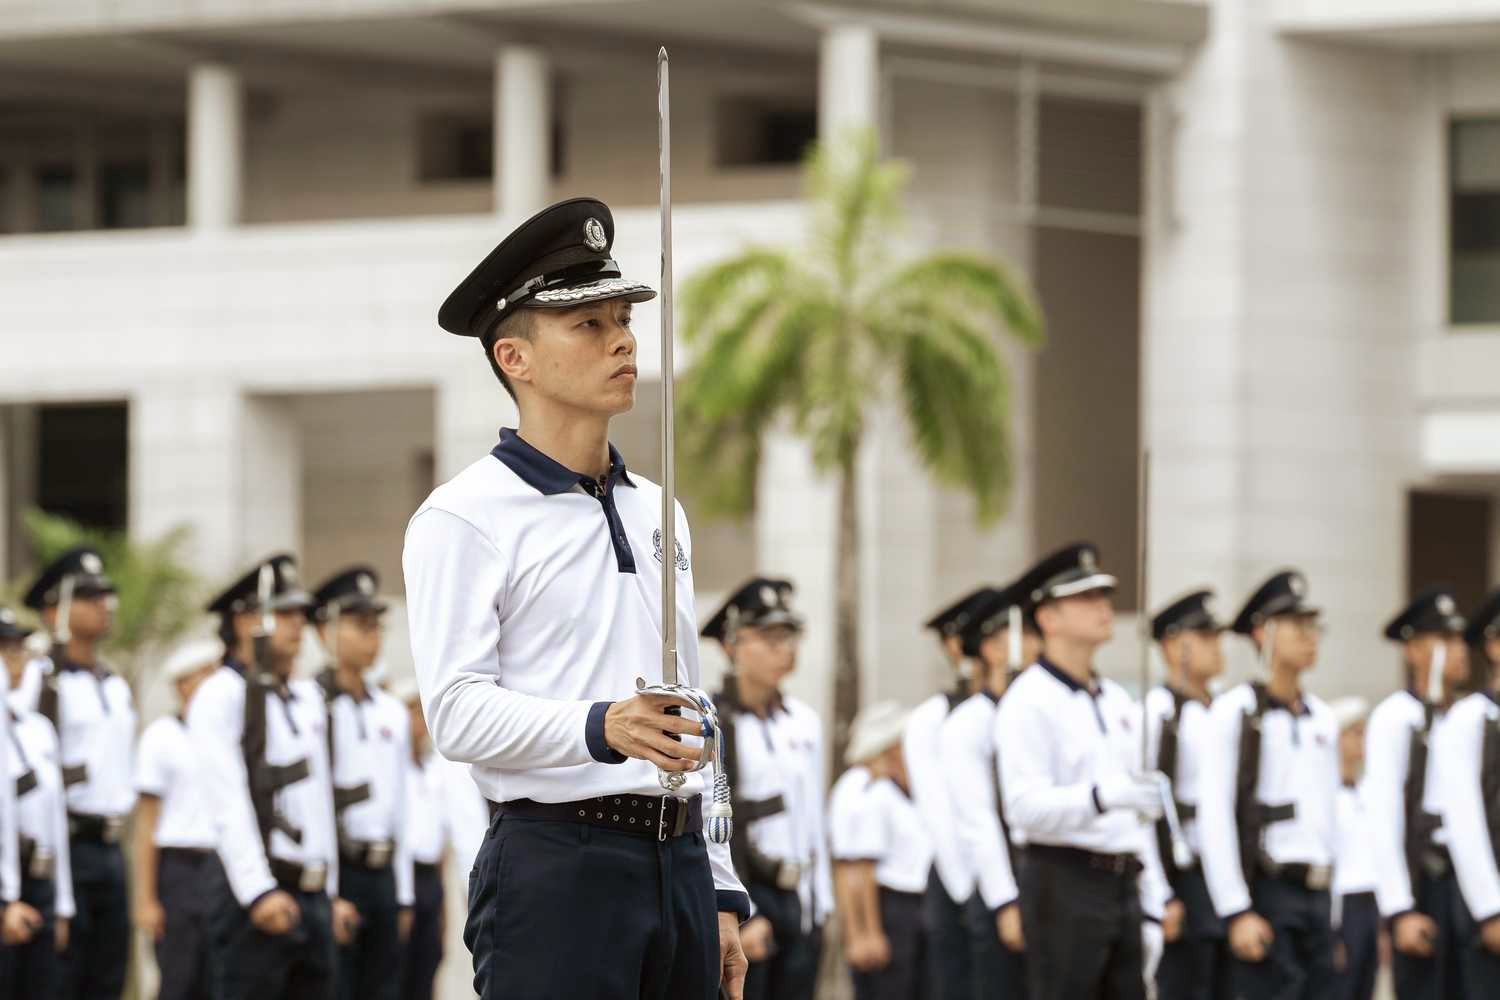 photo of DAC Tan infront of the contingent, in a stationary position with his sword pointing upwards, during a rehearsal